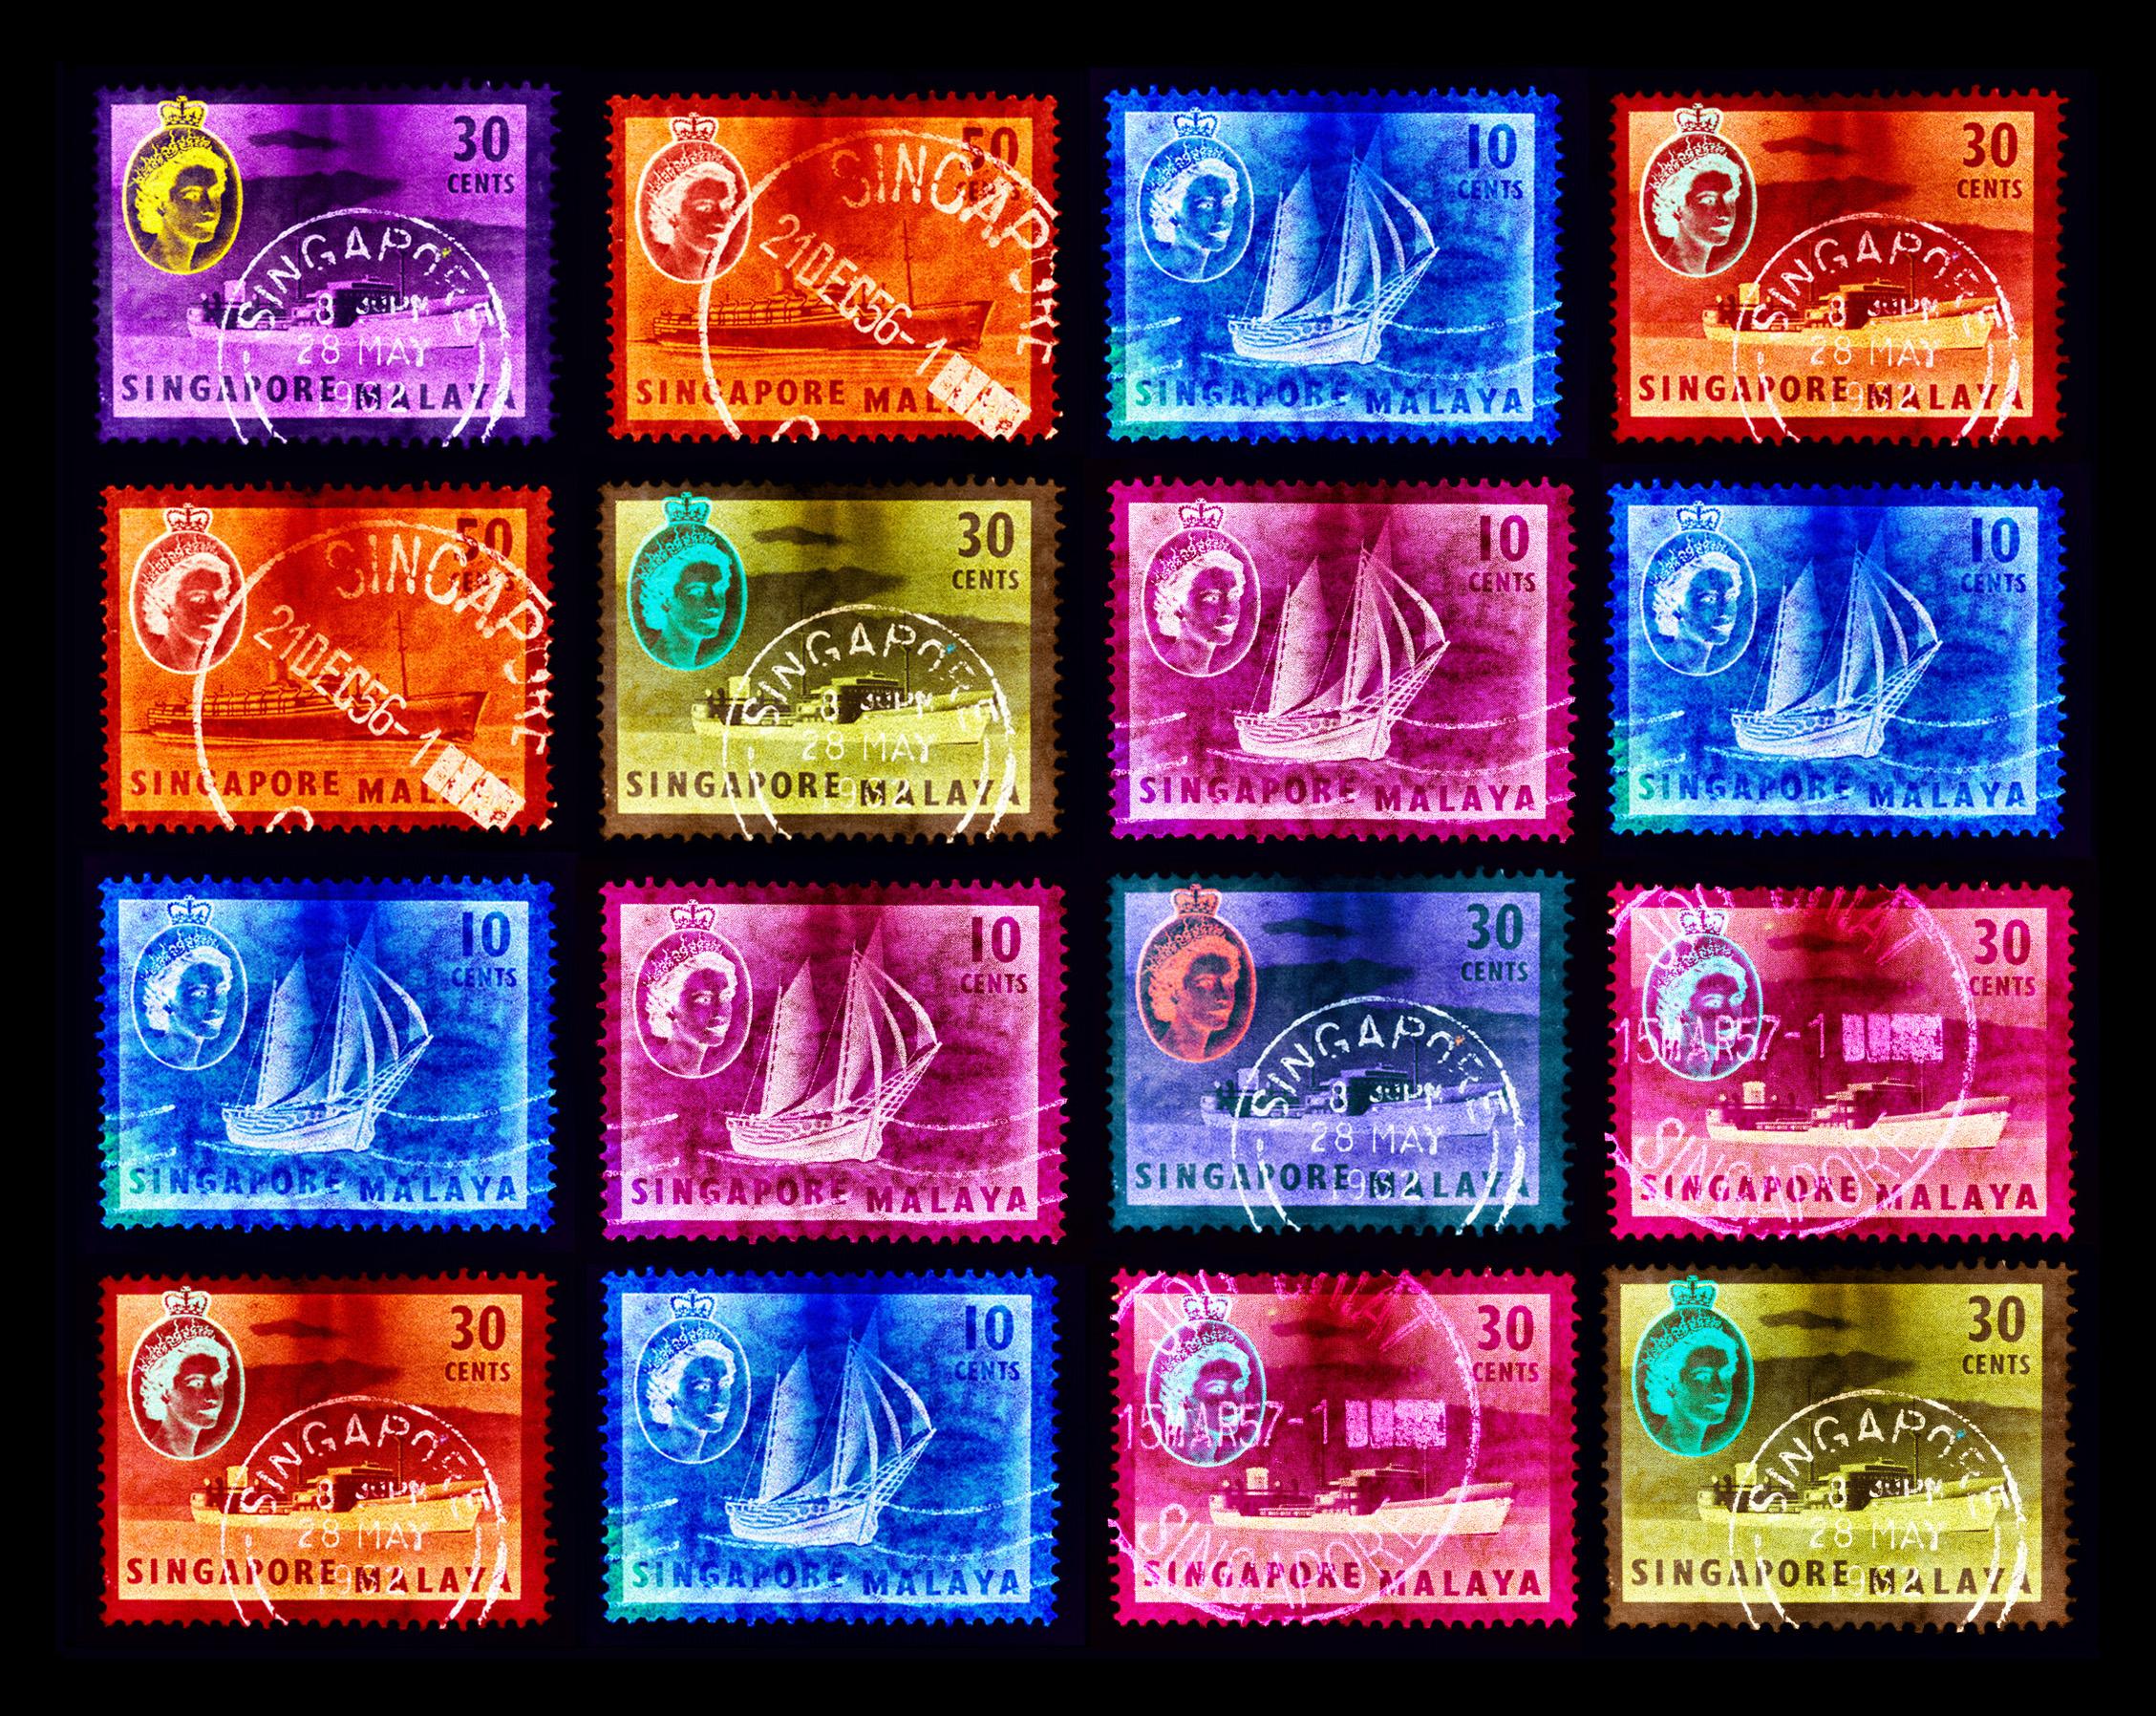 Heidler & Heeps Print - Singapore Stamp Collection, Singapore Ship Sequence (4x4) - Pop art color photo